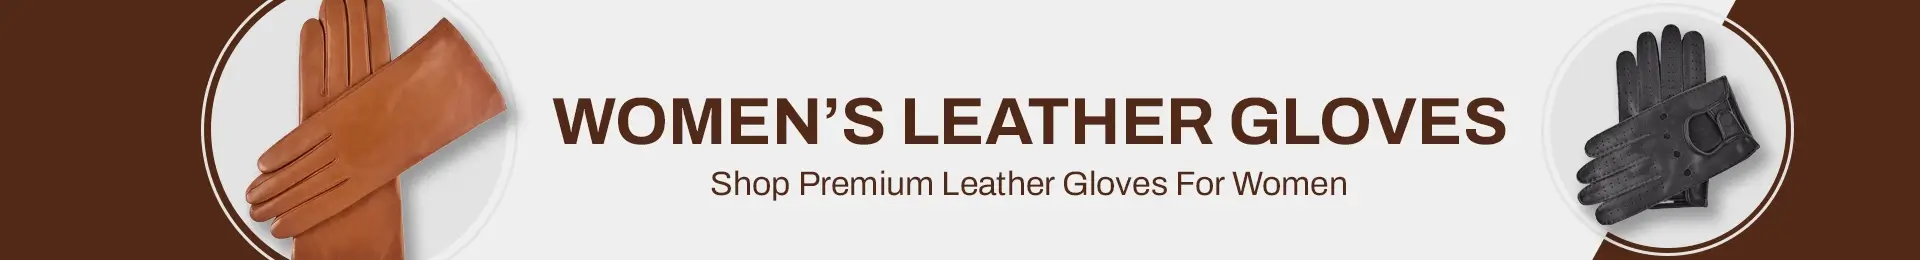 women leather gloves, ladies leather gloves, black leather gloves women, womens leather driving gloves, brown leather gloves womens